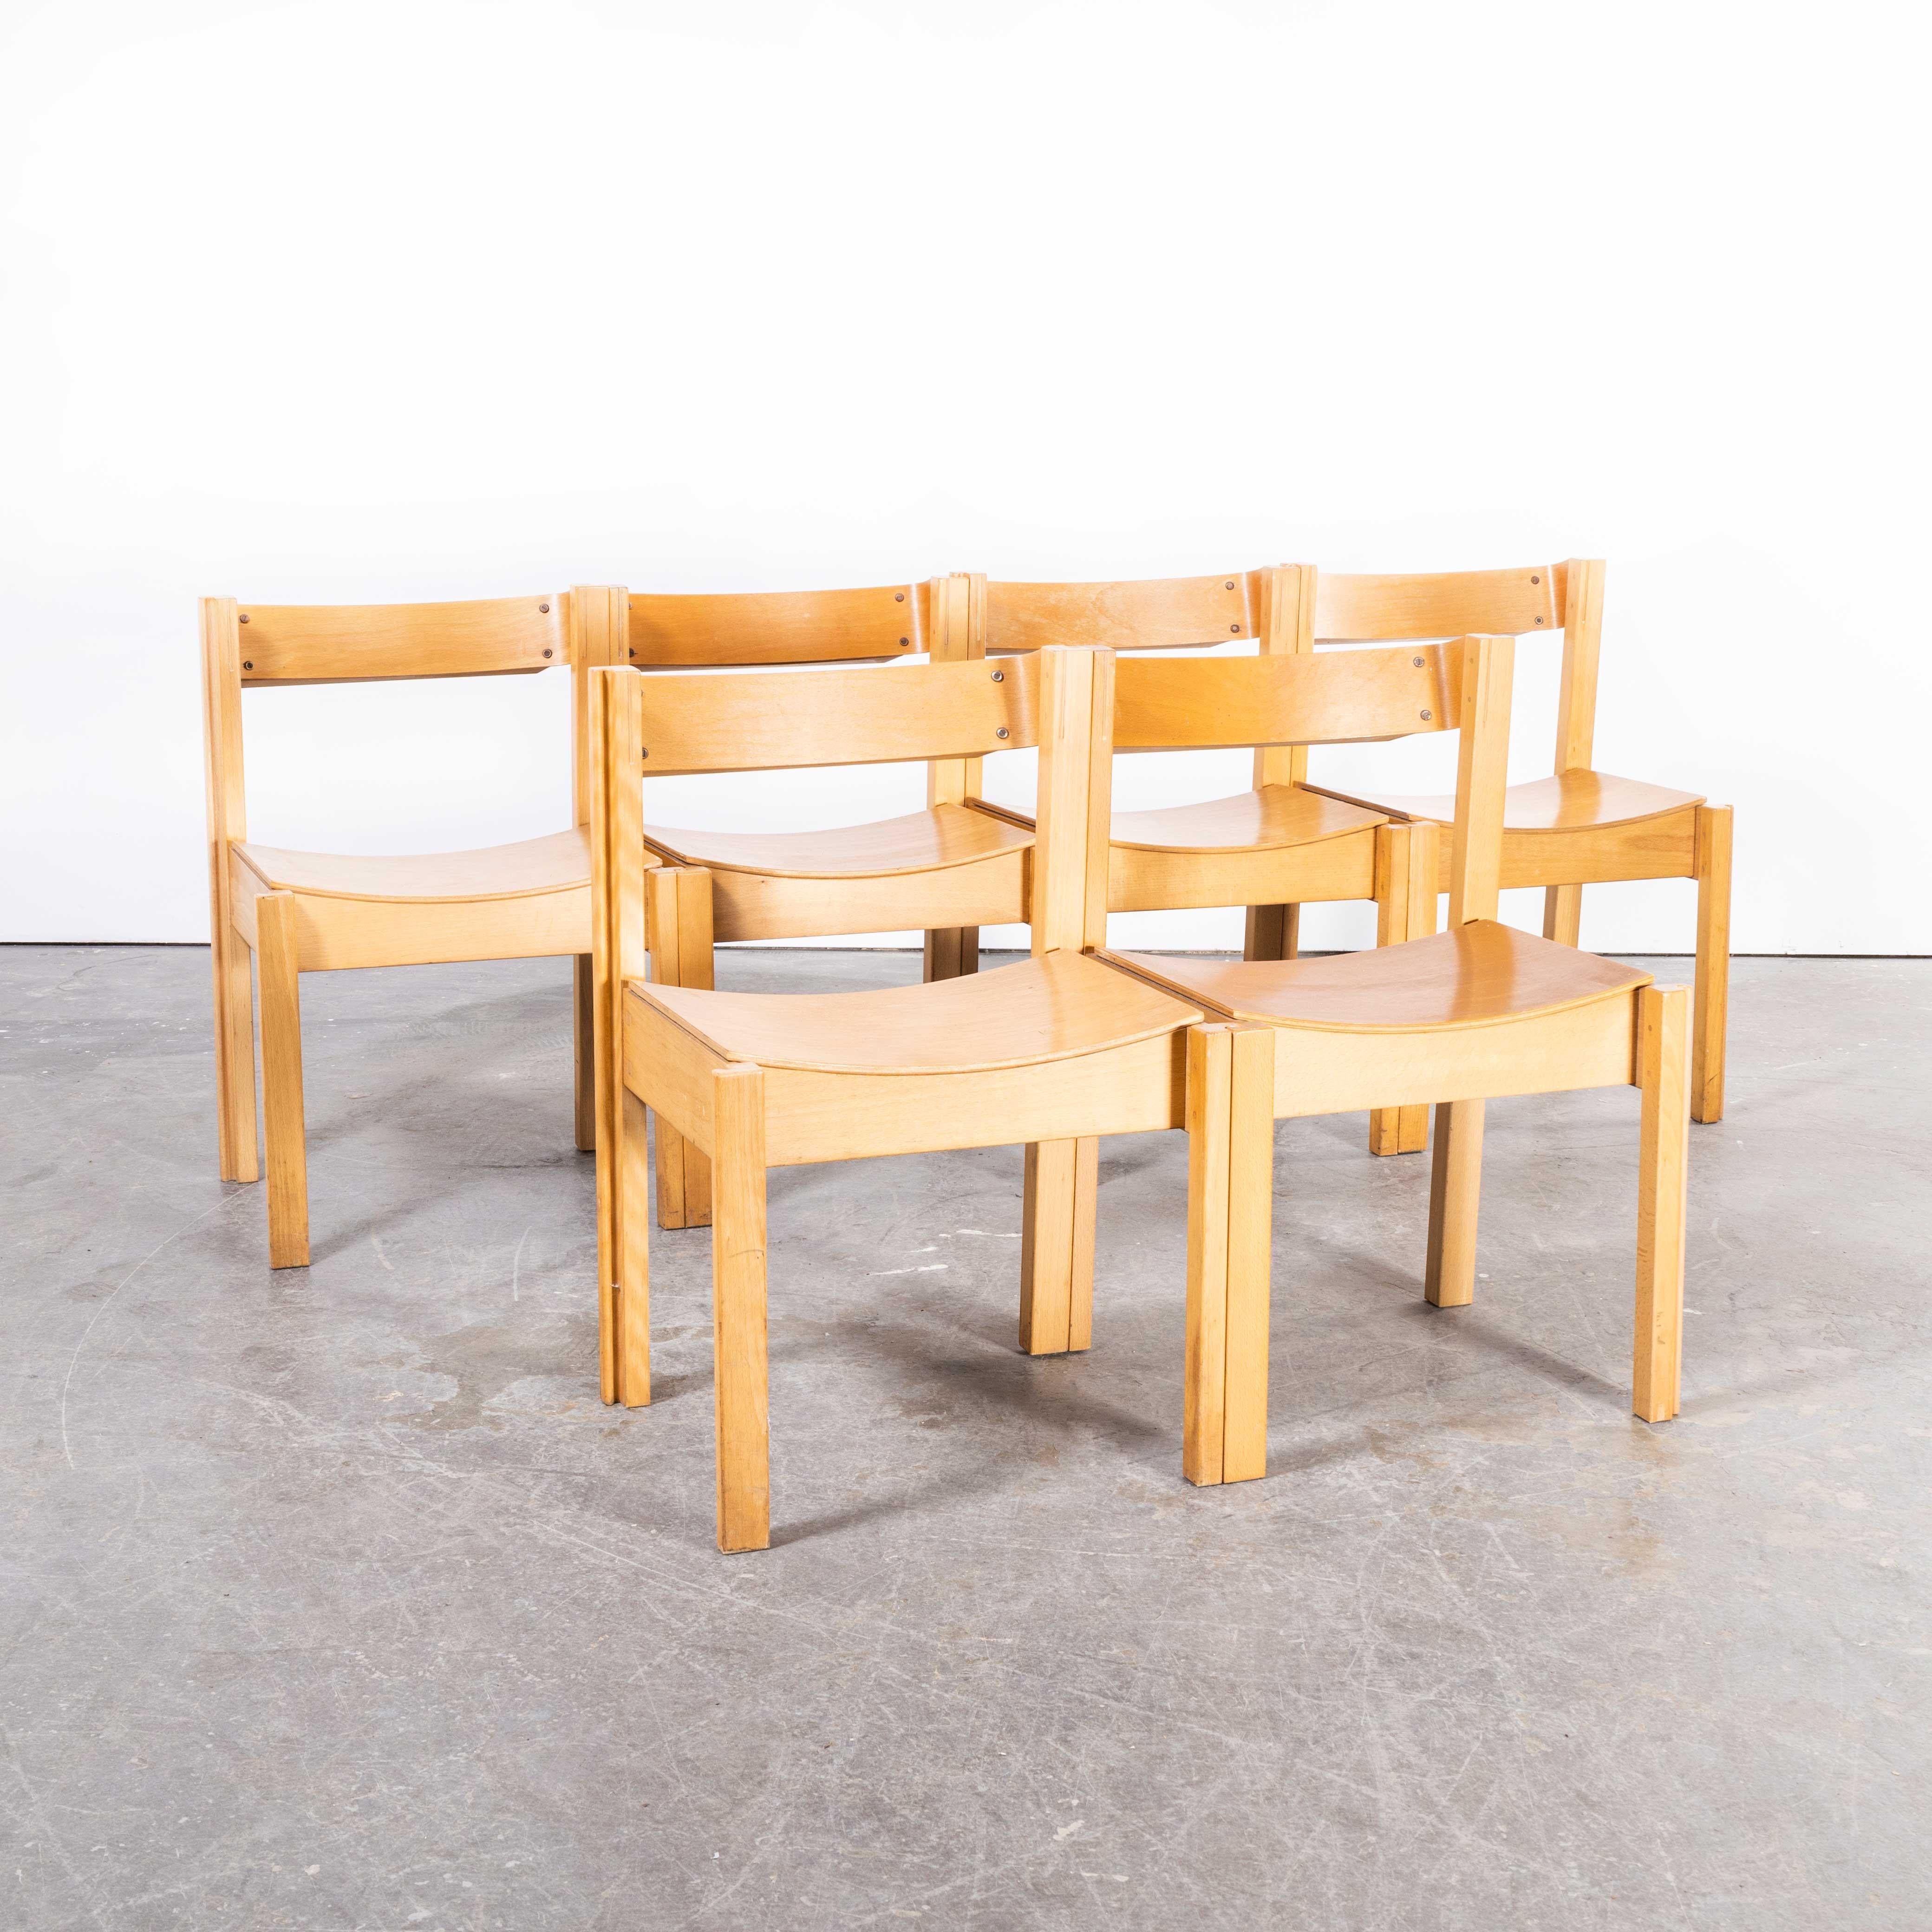 1960’s Linking And Stacking Chairs By Clive Bacon – Set Of Six
1960’s Linking And Stacking Chairs By Clive Bacon – Set Of Six. Bacon’s ingenious jigsaw leg design enables the chairs to be connected together to form solid rows and also allows the